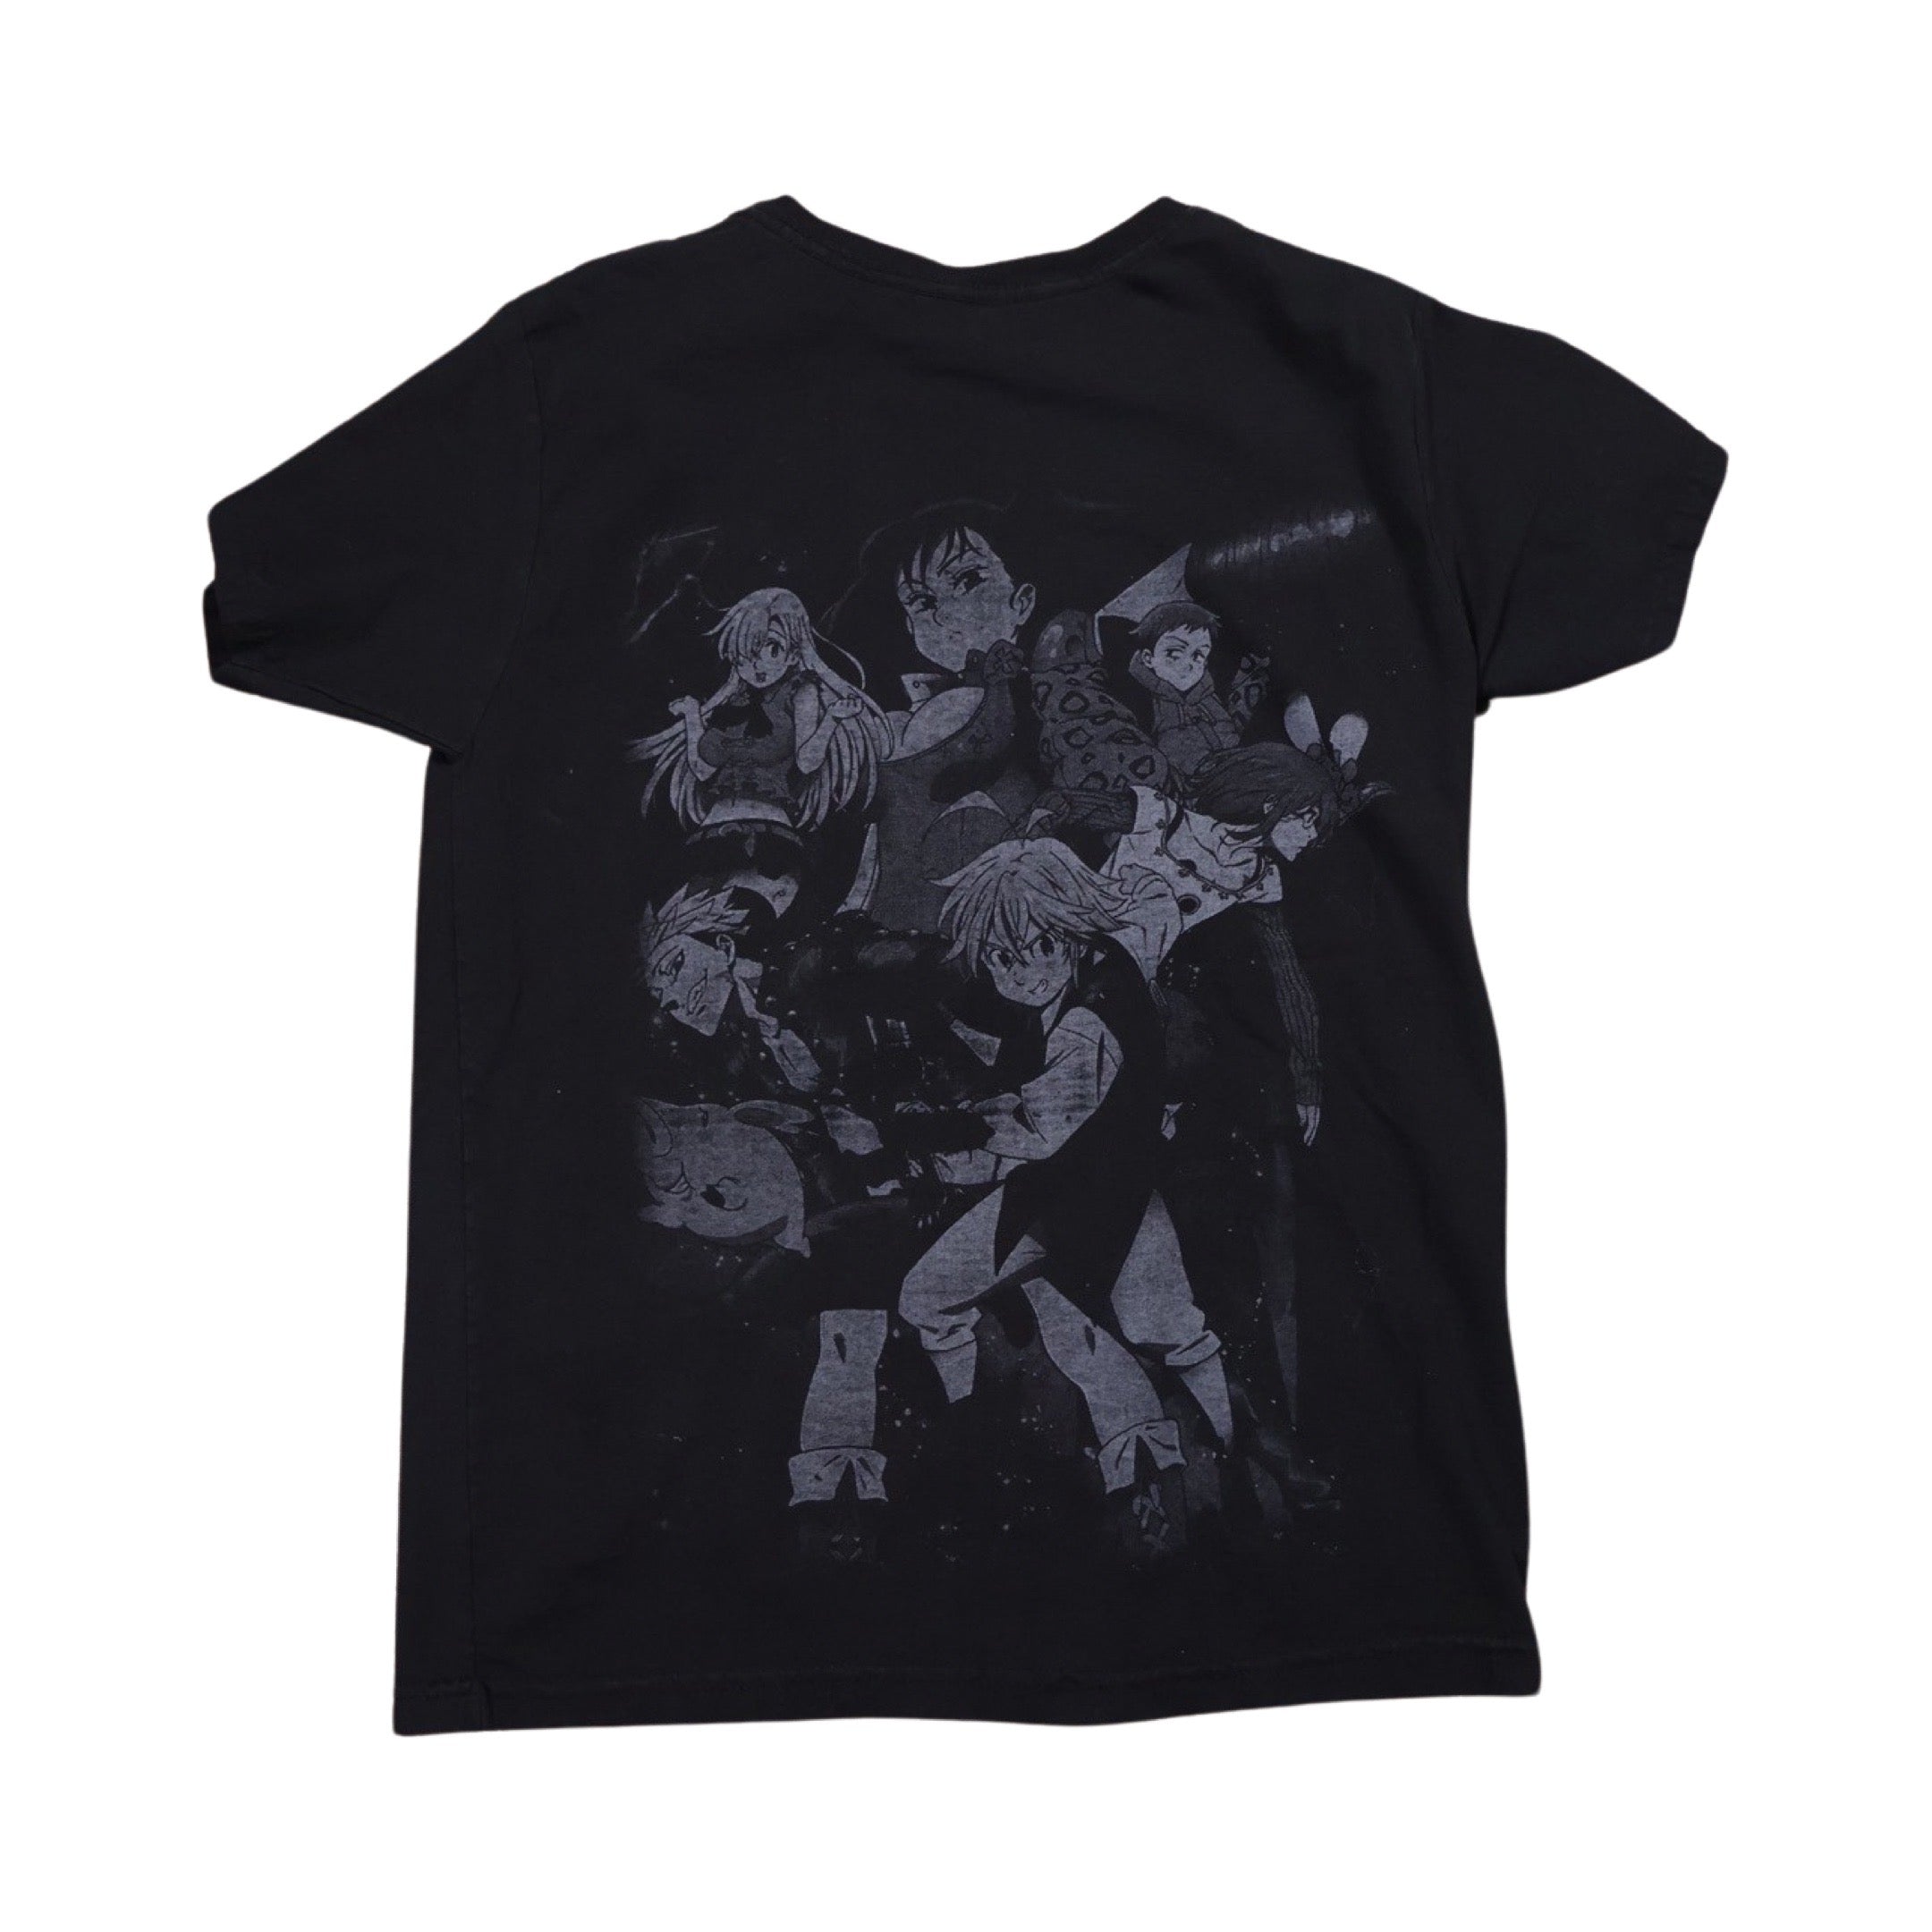 Seven Deadly Sins Anime T-Shirt (Small)